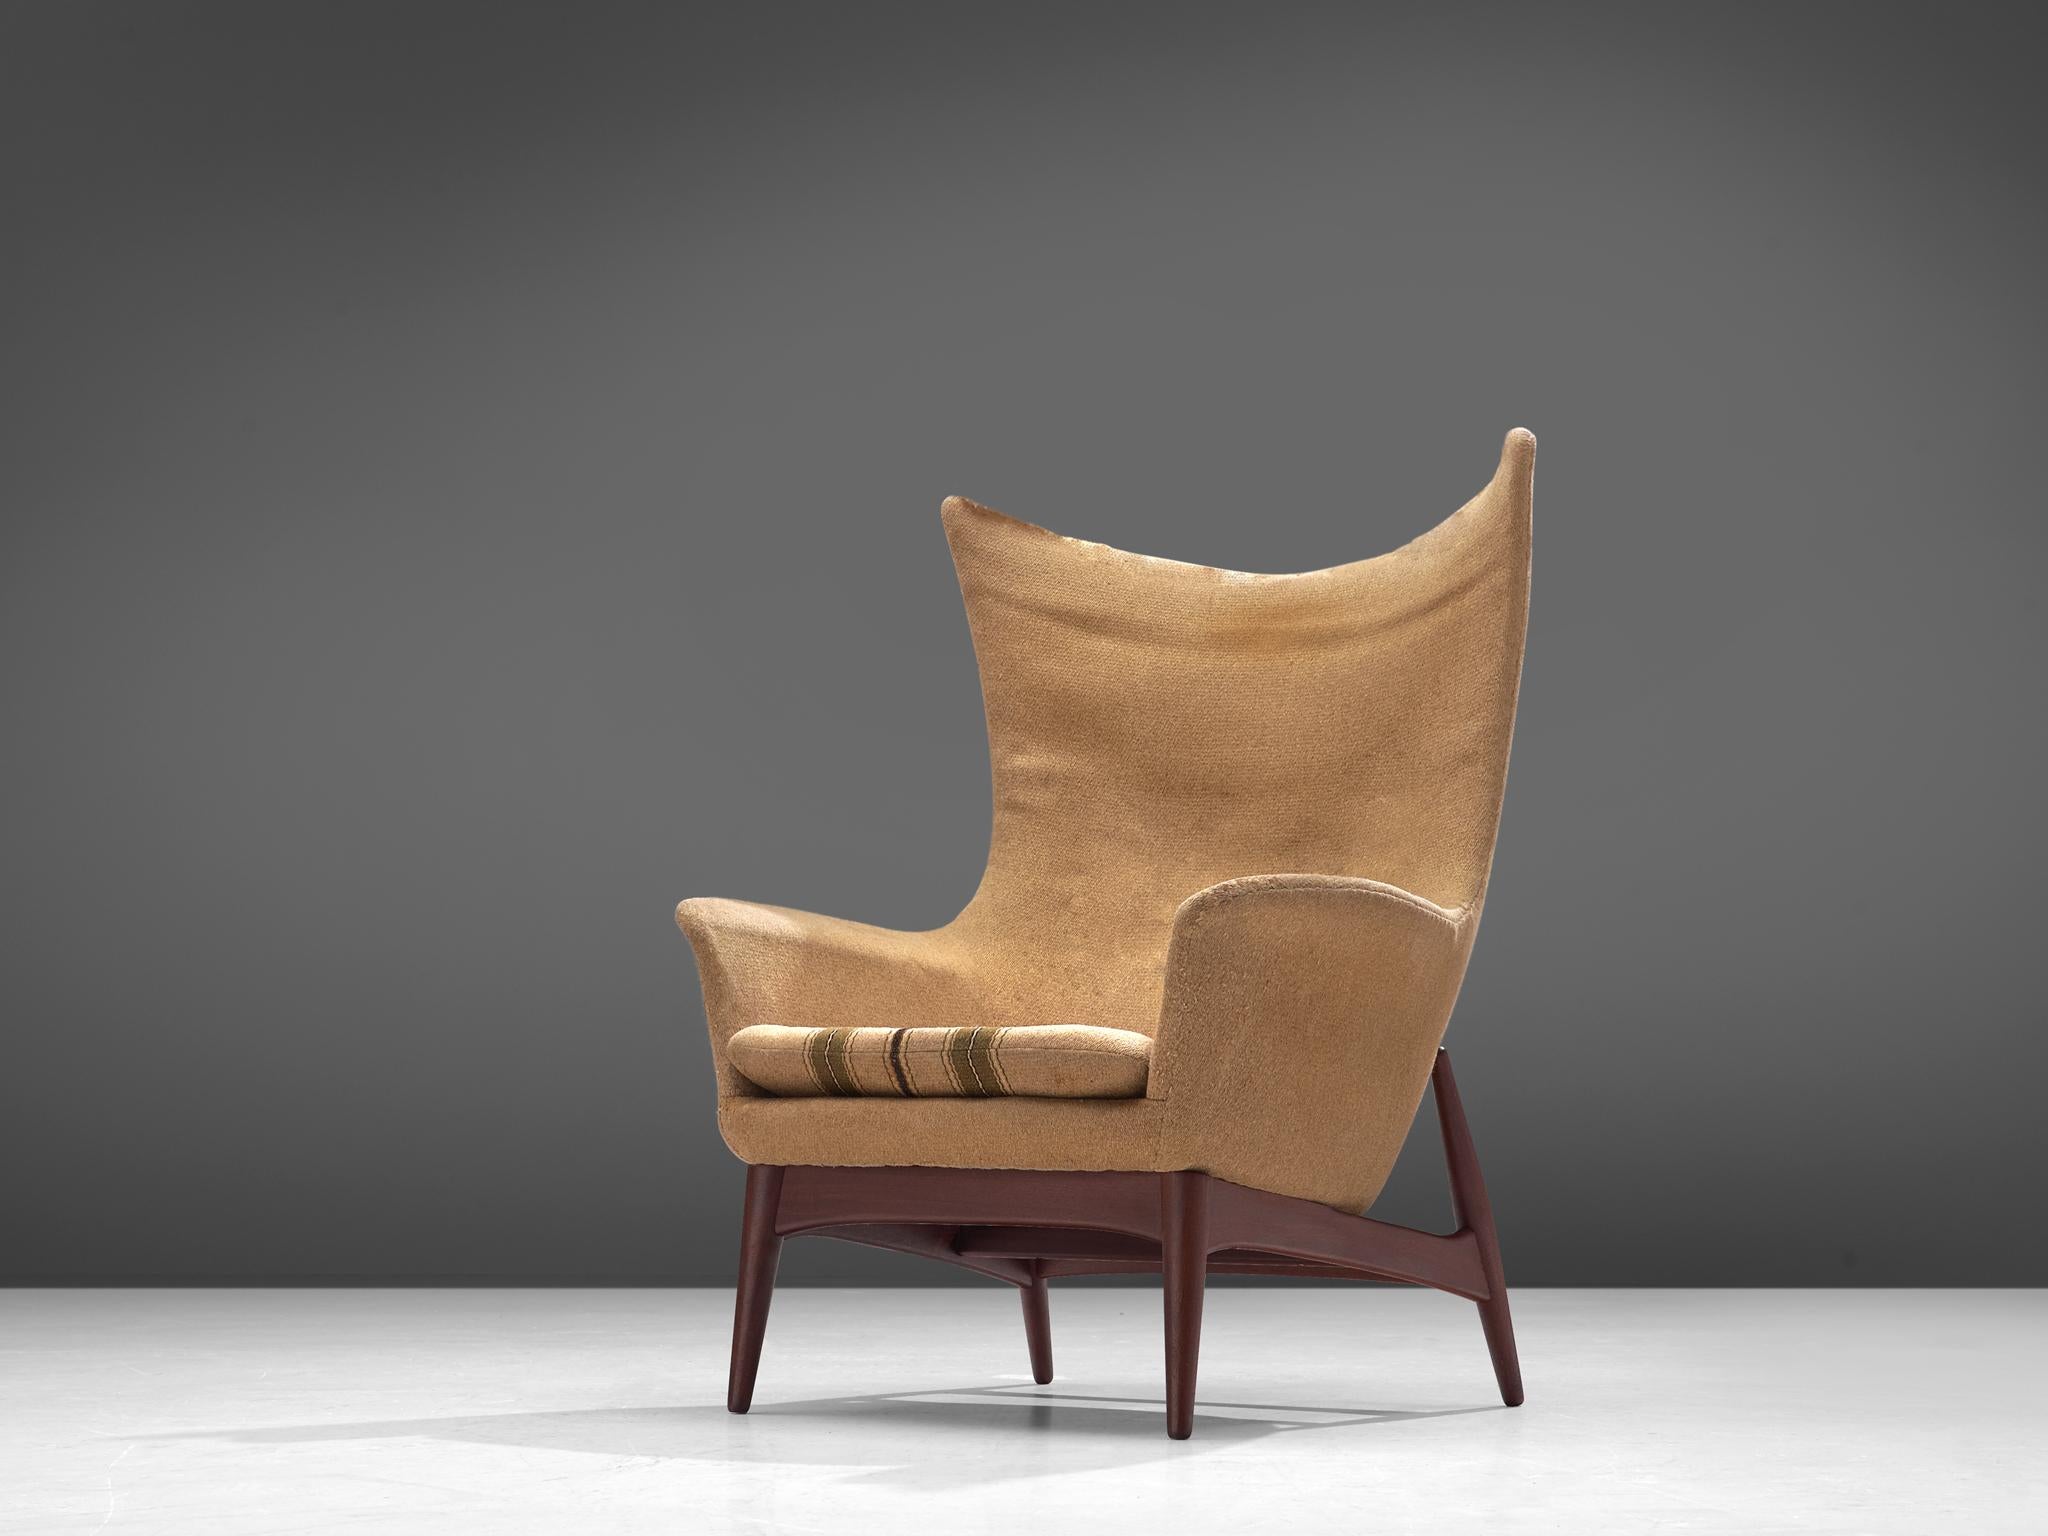 Egg lounge chair, attributed to H.W. Klein, fabric and teak, Denmark, 1960s

Sculptural lounge chair attributed to Henry Walter Klein. This wingback chair is a wonderful example of Scandinavian design, featuring a high, shell inspired backrest that